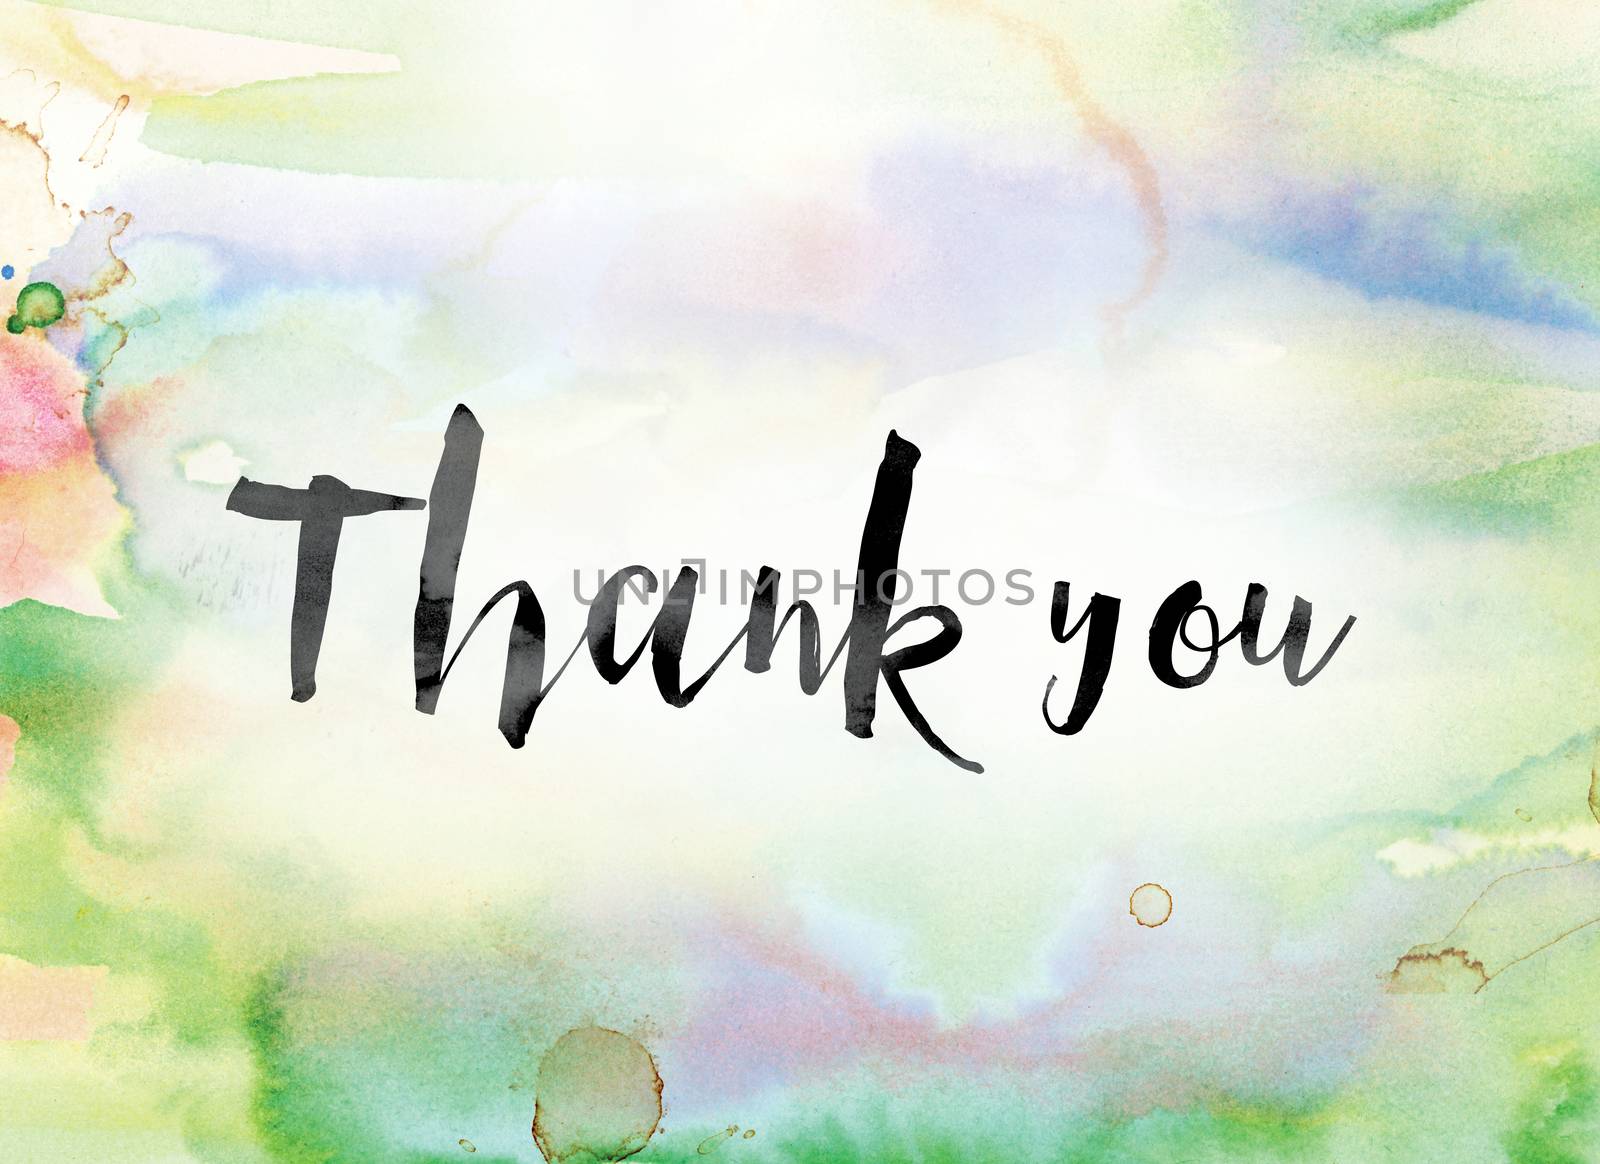 The word "Thank you" painted in black ink over a colorful watercolor washed background concept and theme.